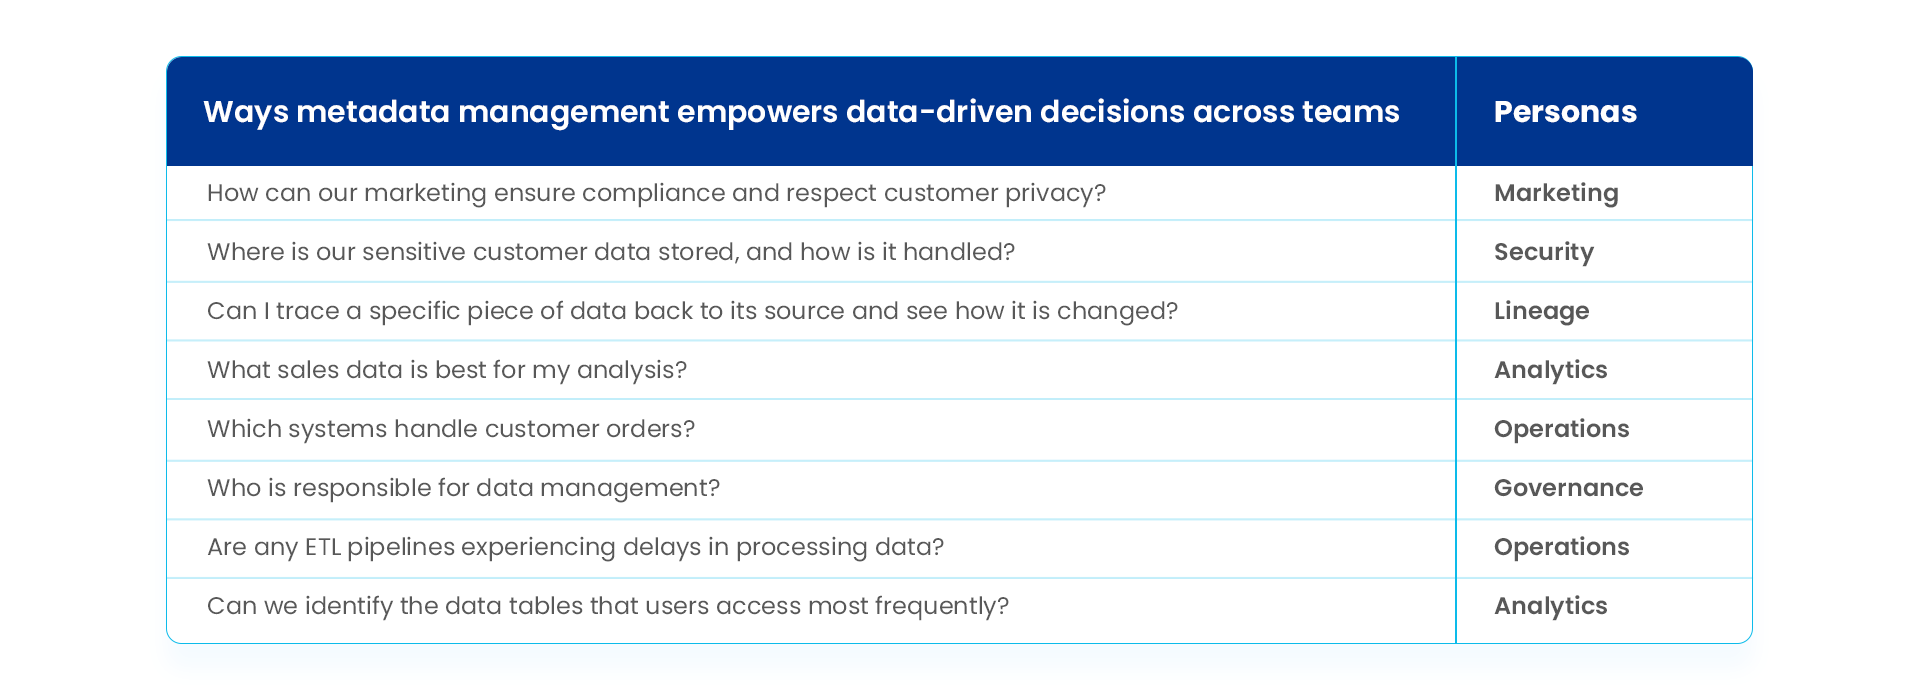 Ways metadata management empowers data-driven decisions across teams. Image by Astera.